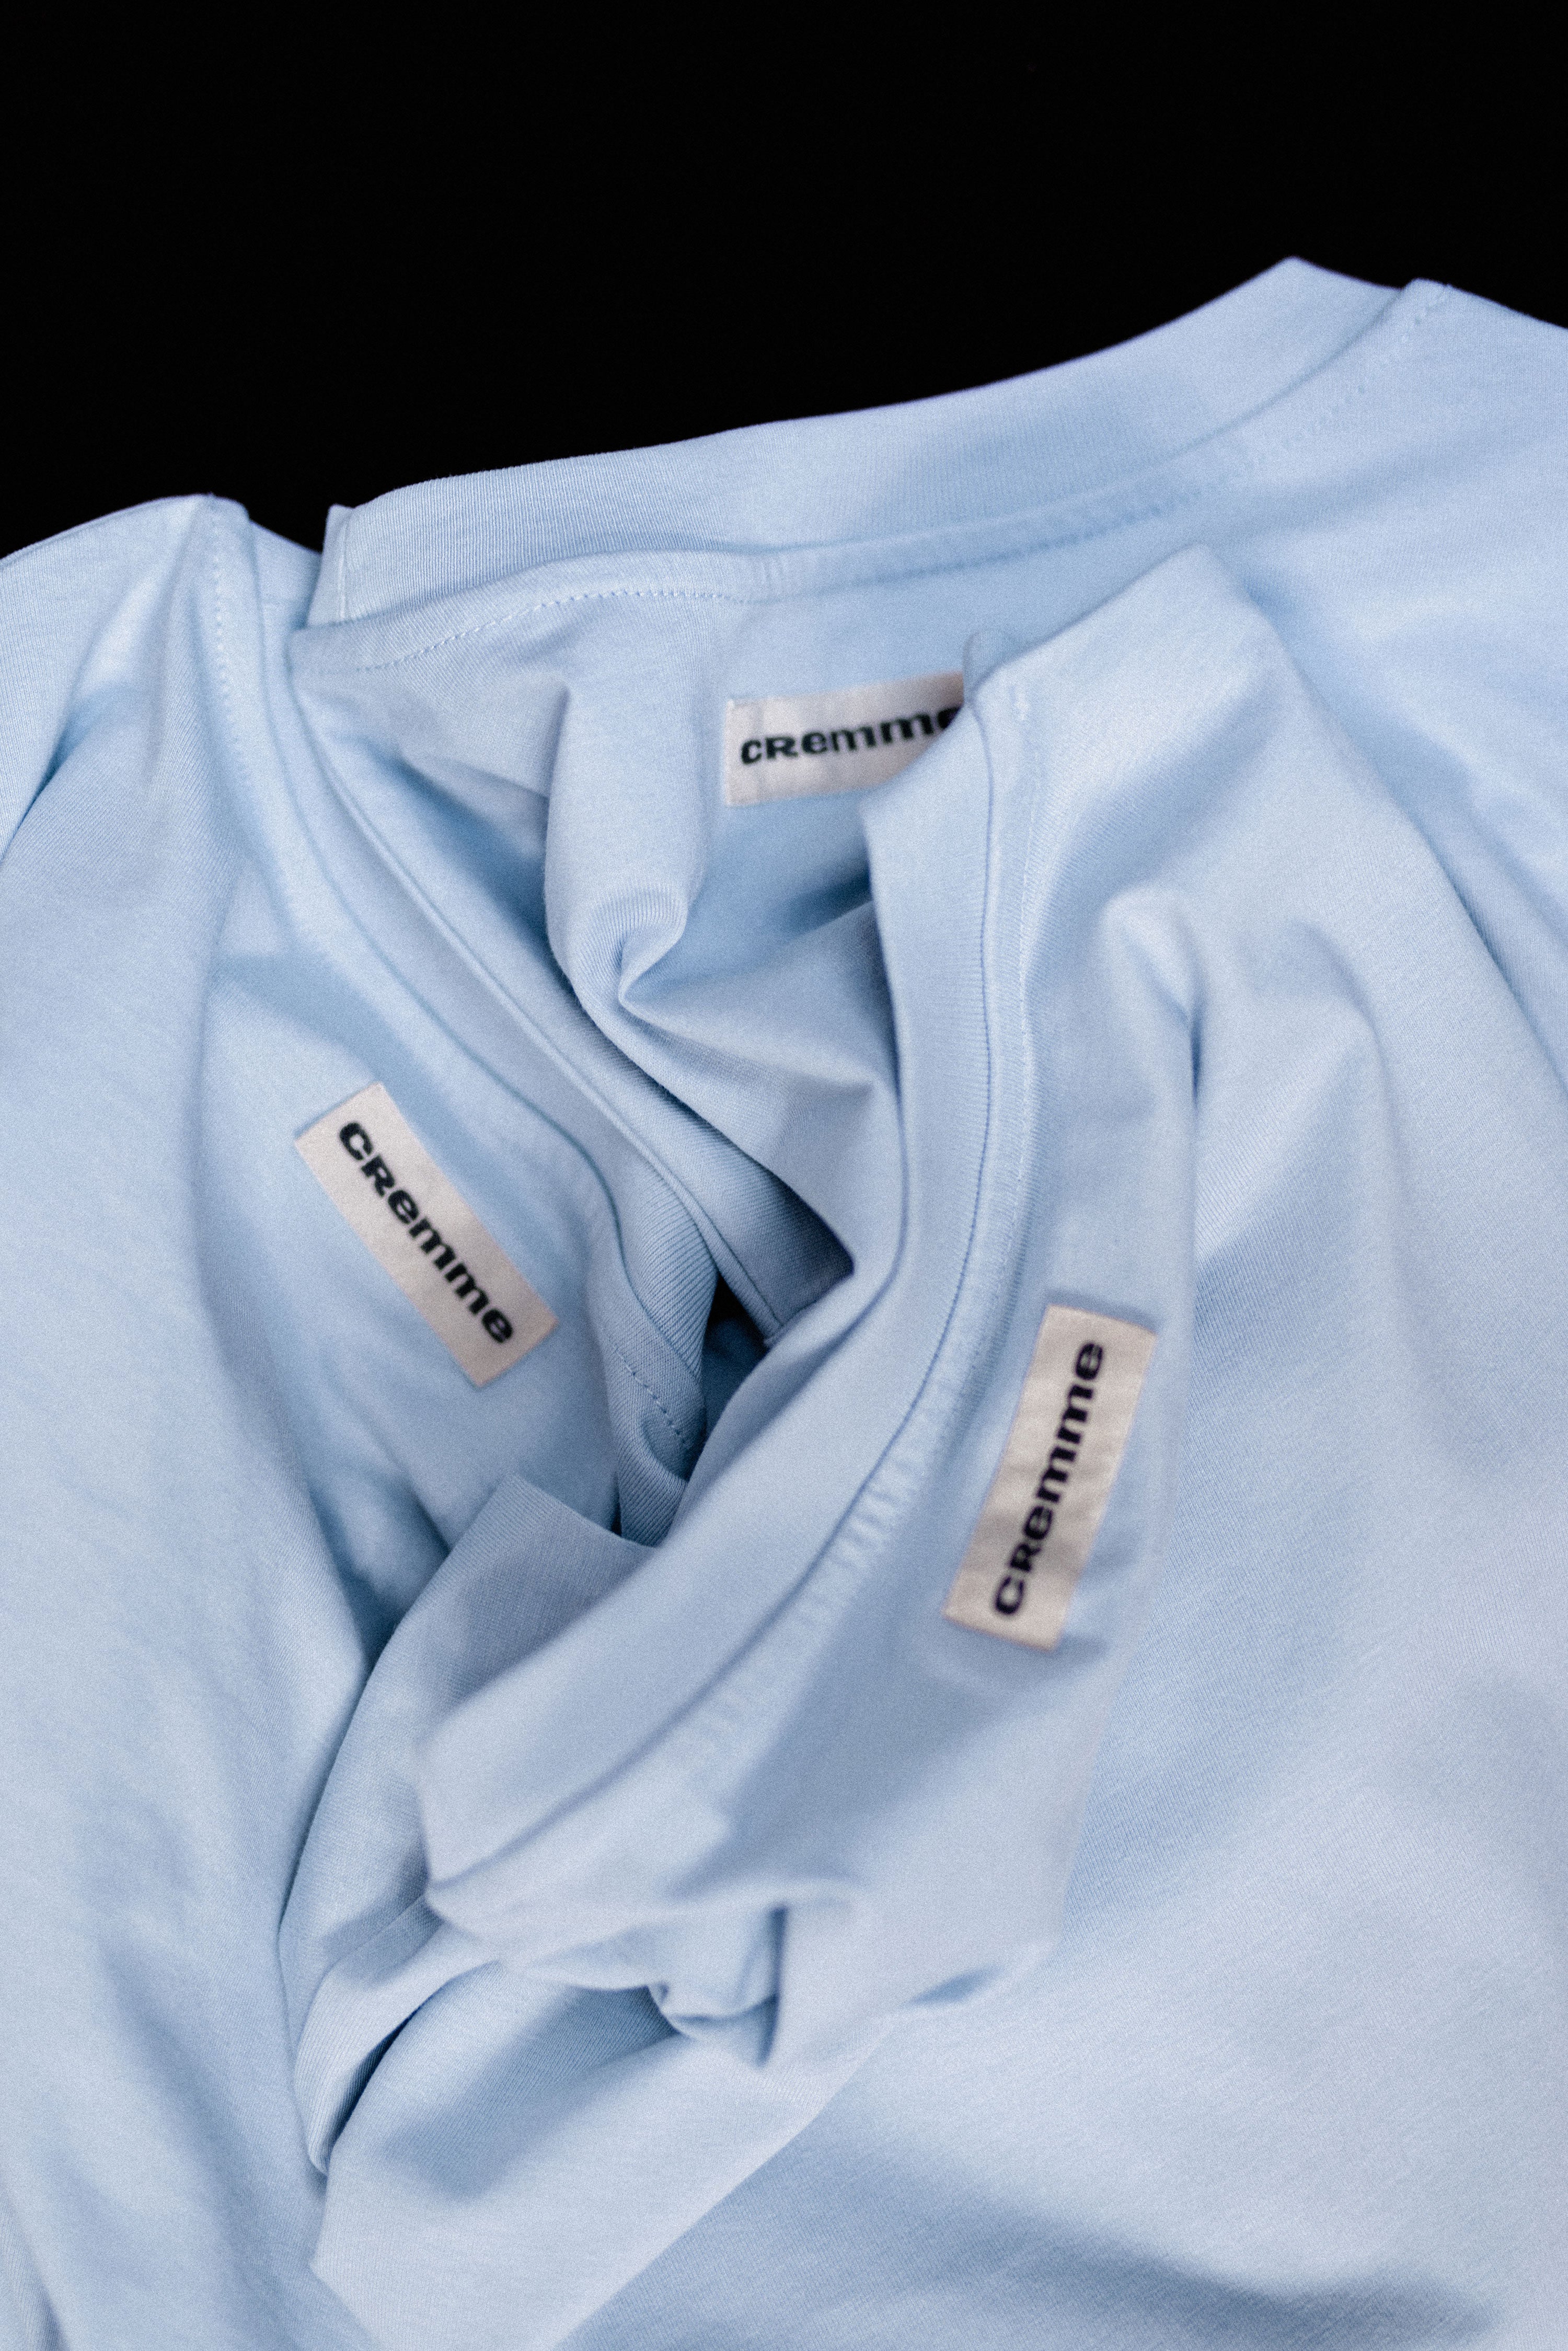 Cremme Classic T-Shirts in Powder Blue